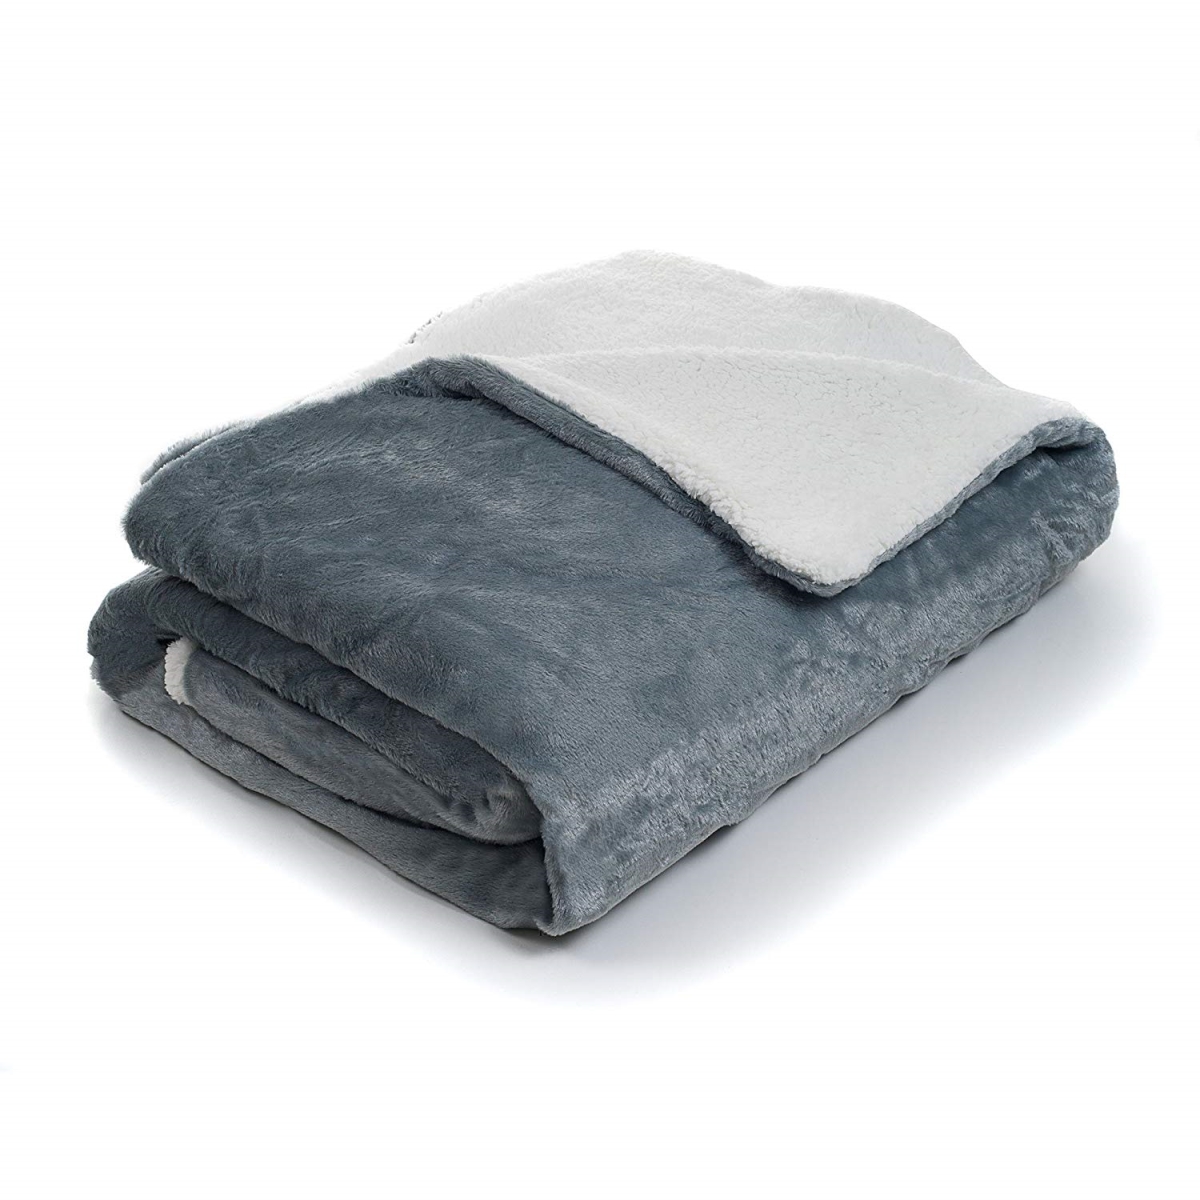 61a-06431 Fleece Blanket With Sherpa Backing, King Size - Grey